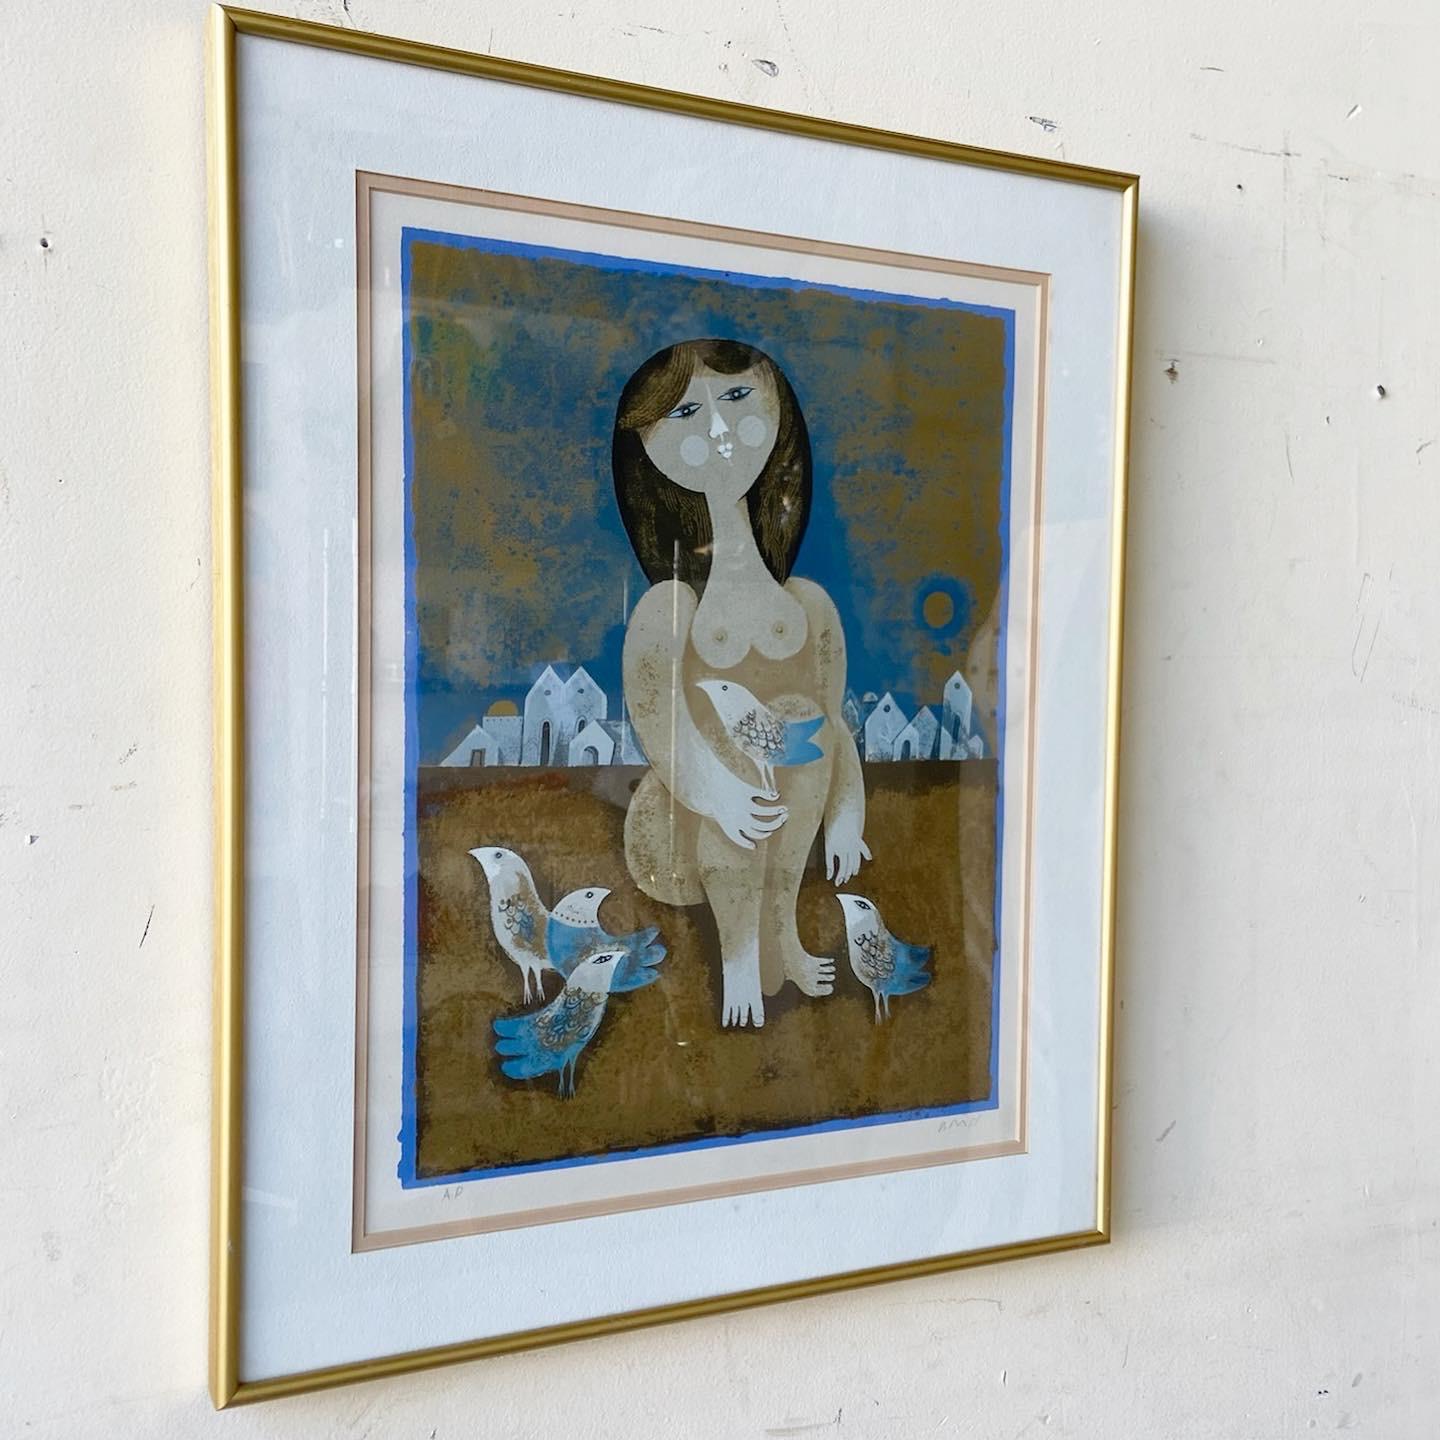 Exceptional vintage signed and framed lithograph by Sam Briss. Features a surreal depiction of a nude woman with birds.
  